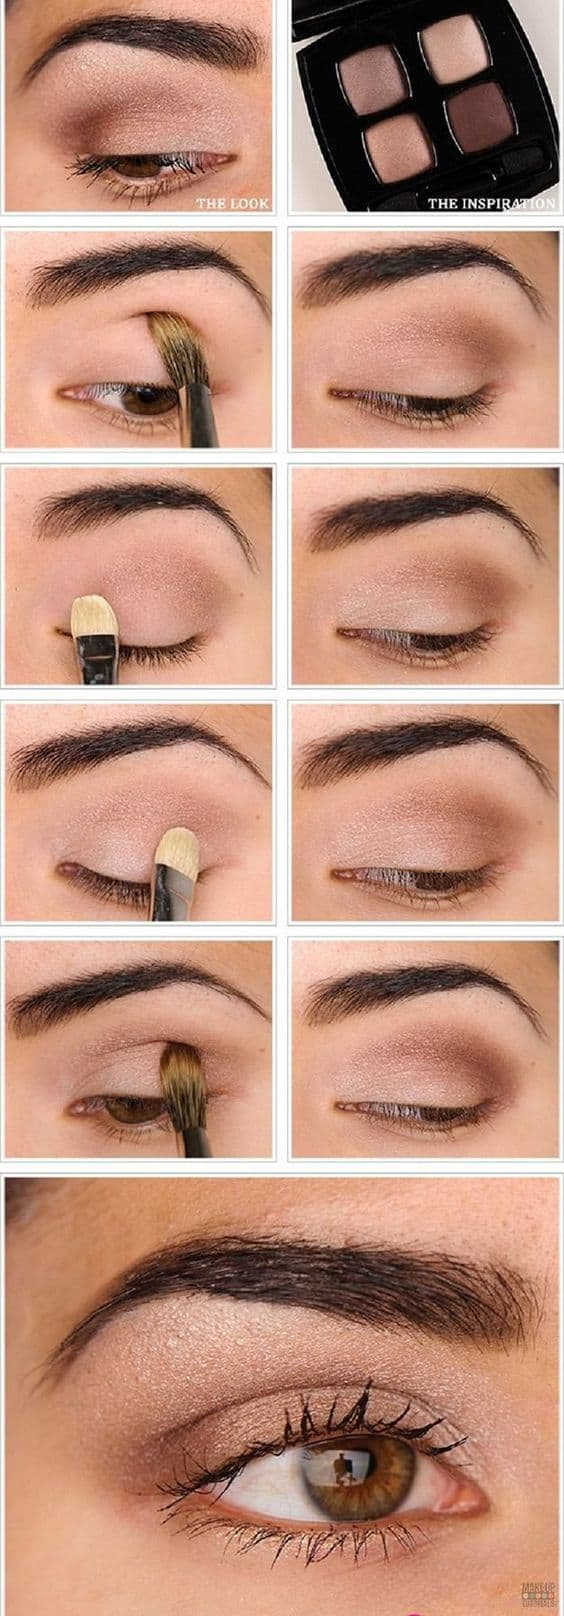 How To Do Eye Makeup For Brown Eyes 10 Makeup Ideas For Brown Eyes Ritely